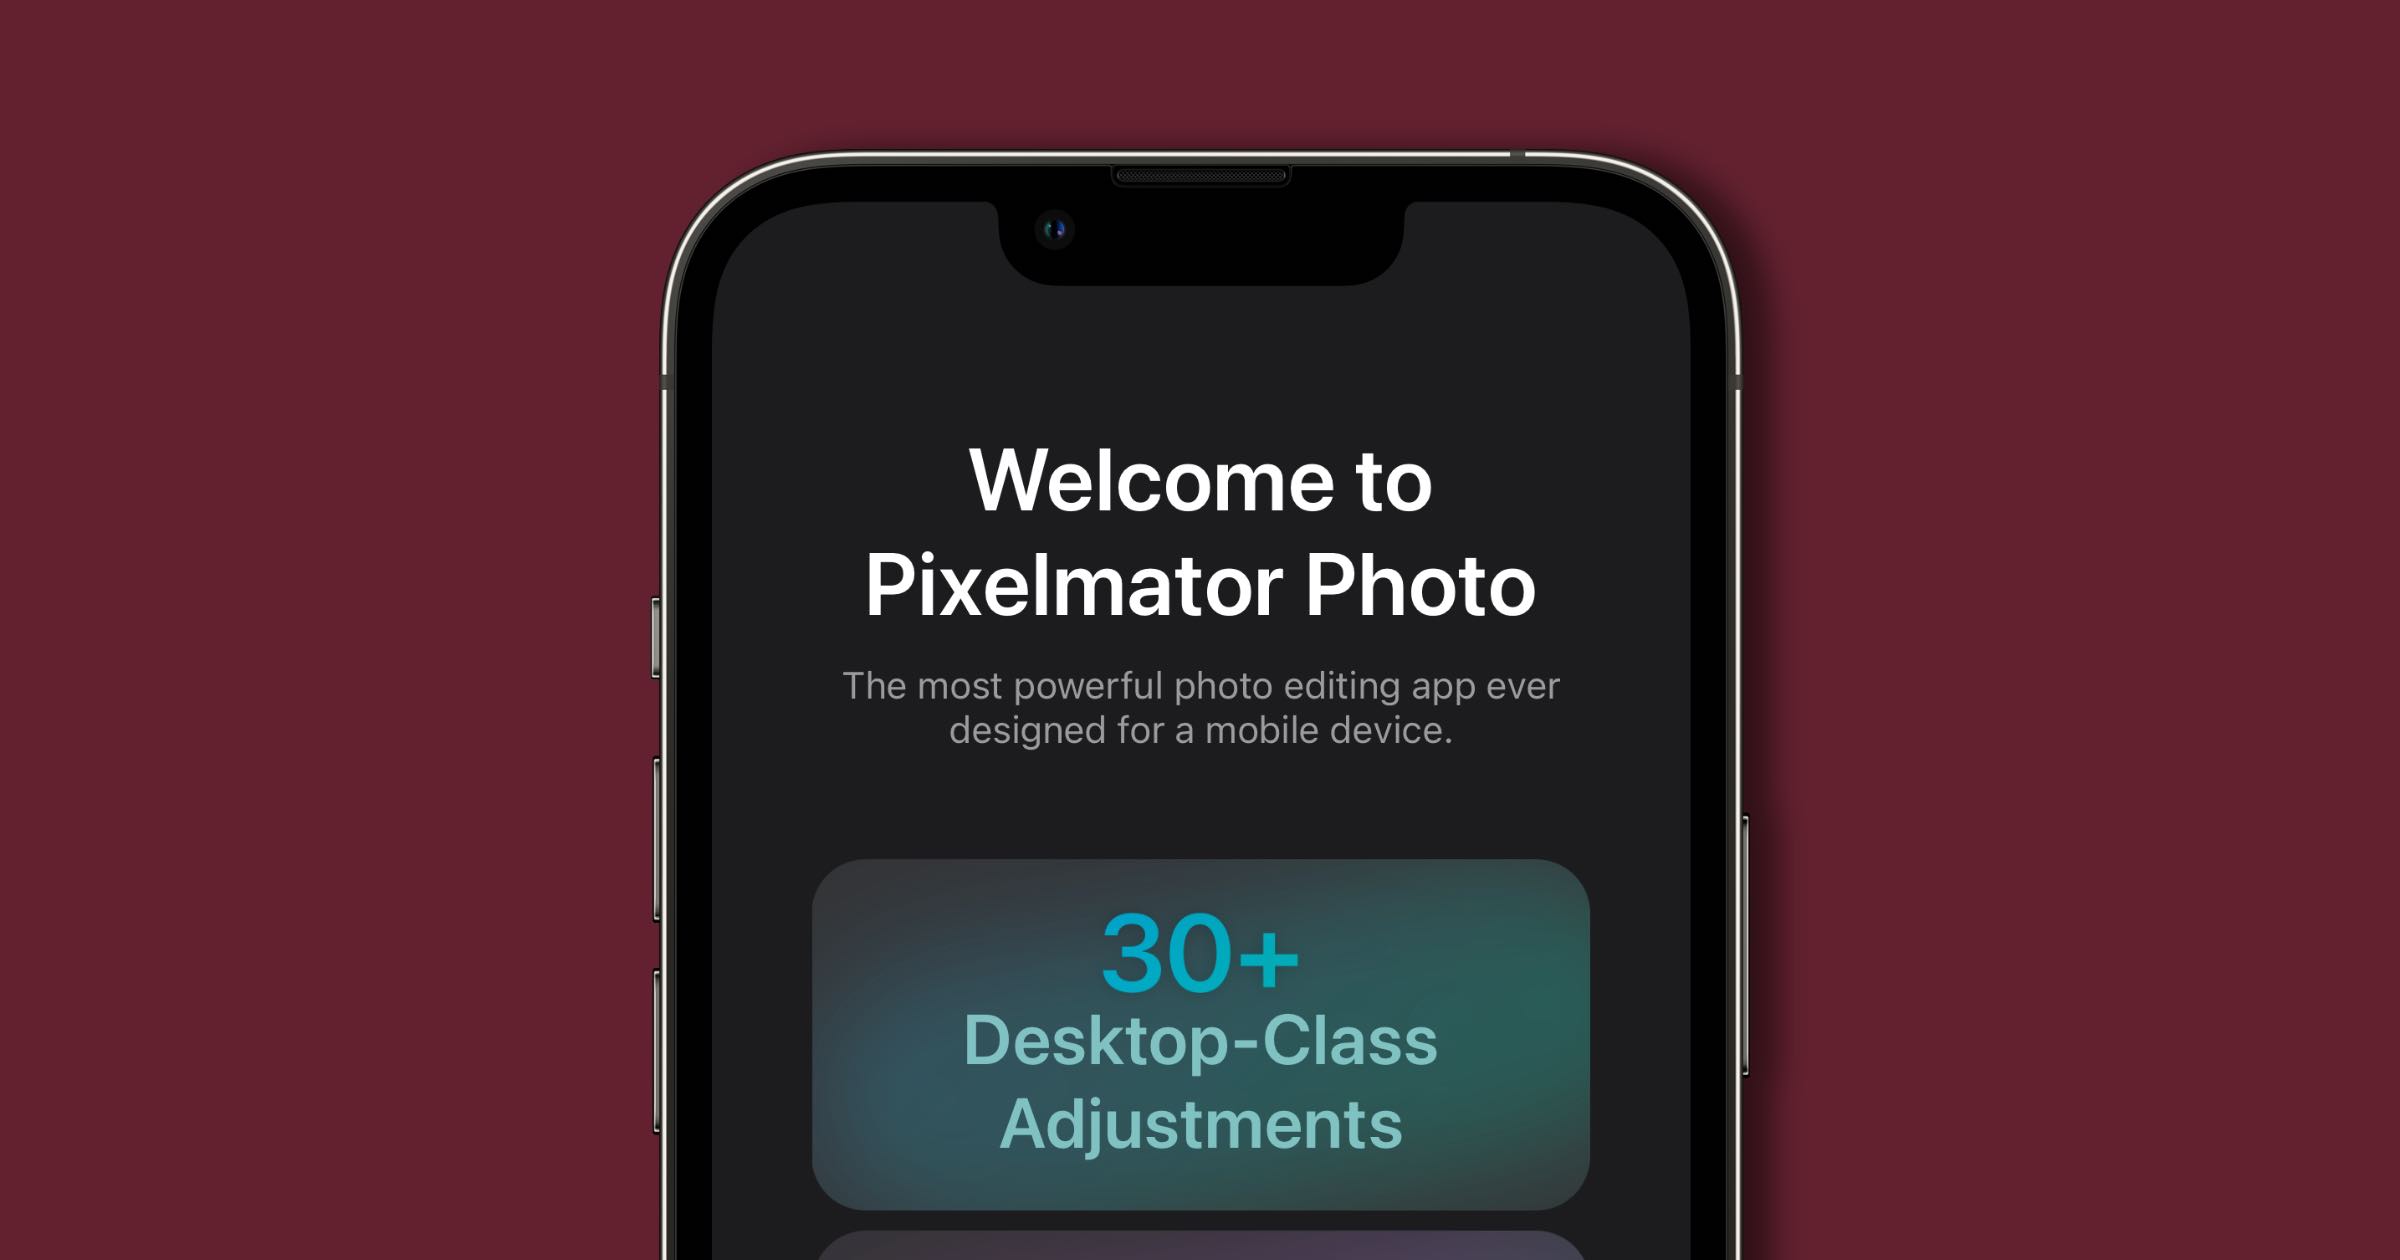 ‘Pixelmator Photo’ Launches for iPhone With 50% Off Introductory Deal